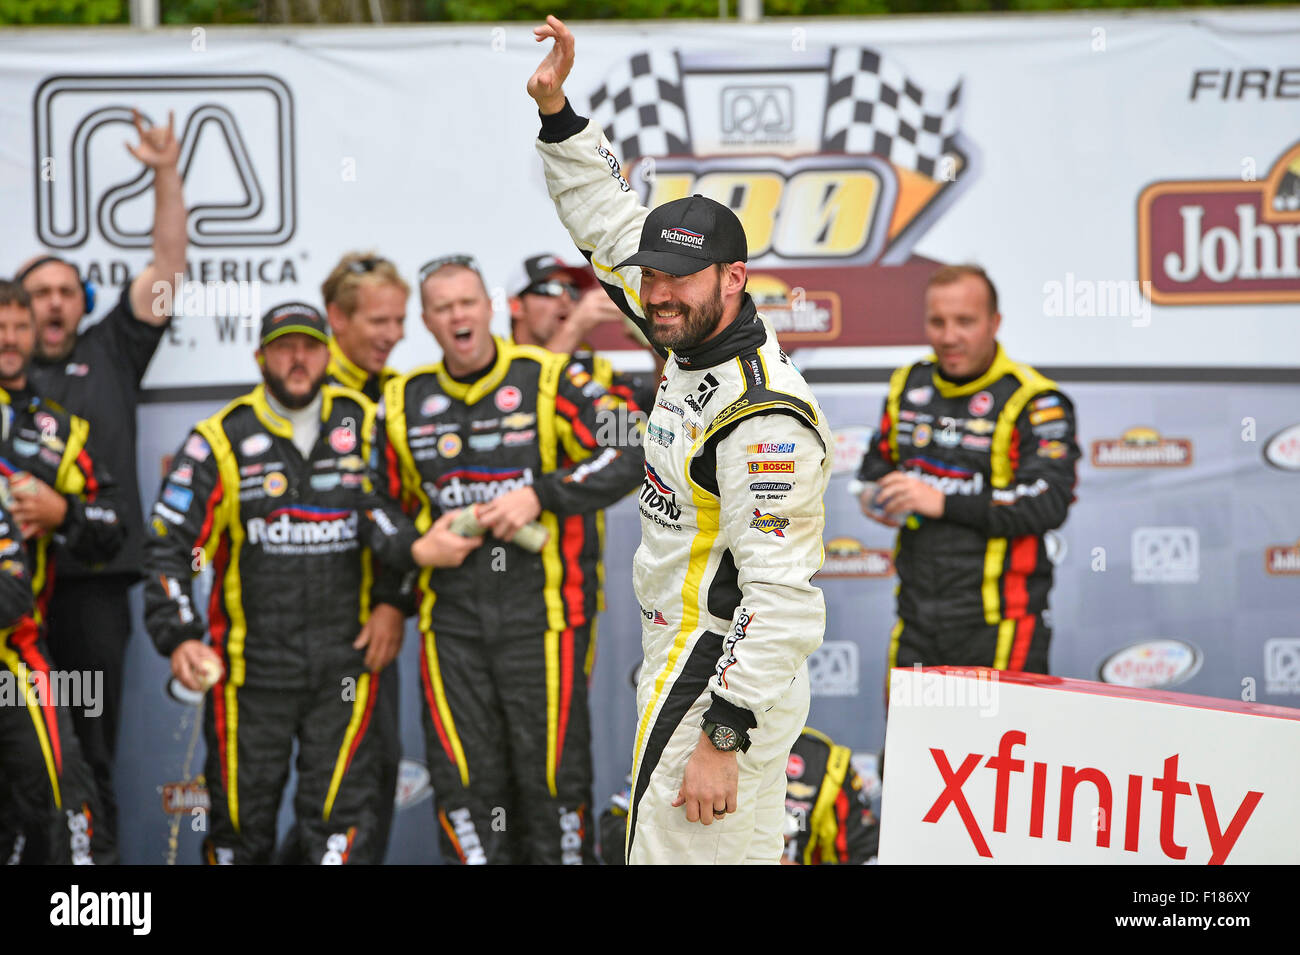 Elkhart Lake, WI, USA. 29th Aug, 2015. Elkhart Lake, WI - Aug 29, 2015: Paul Menard (33) celebrates in victory lane after winning the Road America 180 Fired up by Johnsonville in the Richmond/Menards Chevy at Road America in Elkhart Lake, WI. © csm/Alamy Live News Stock Photo